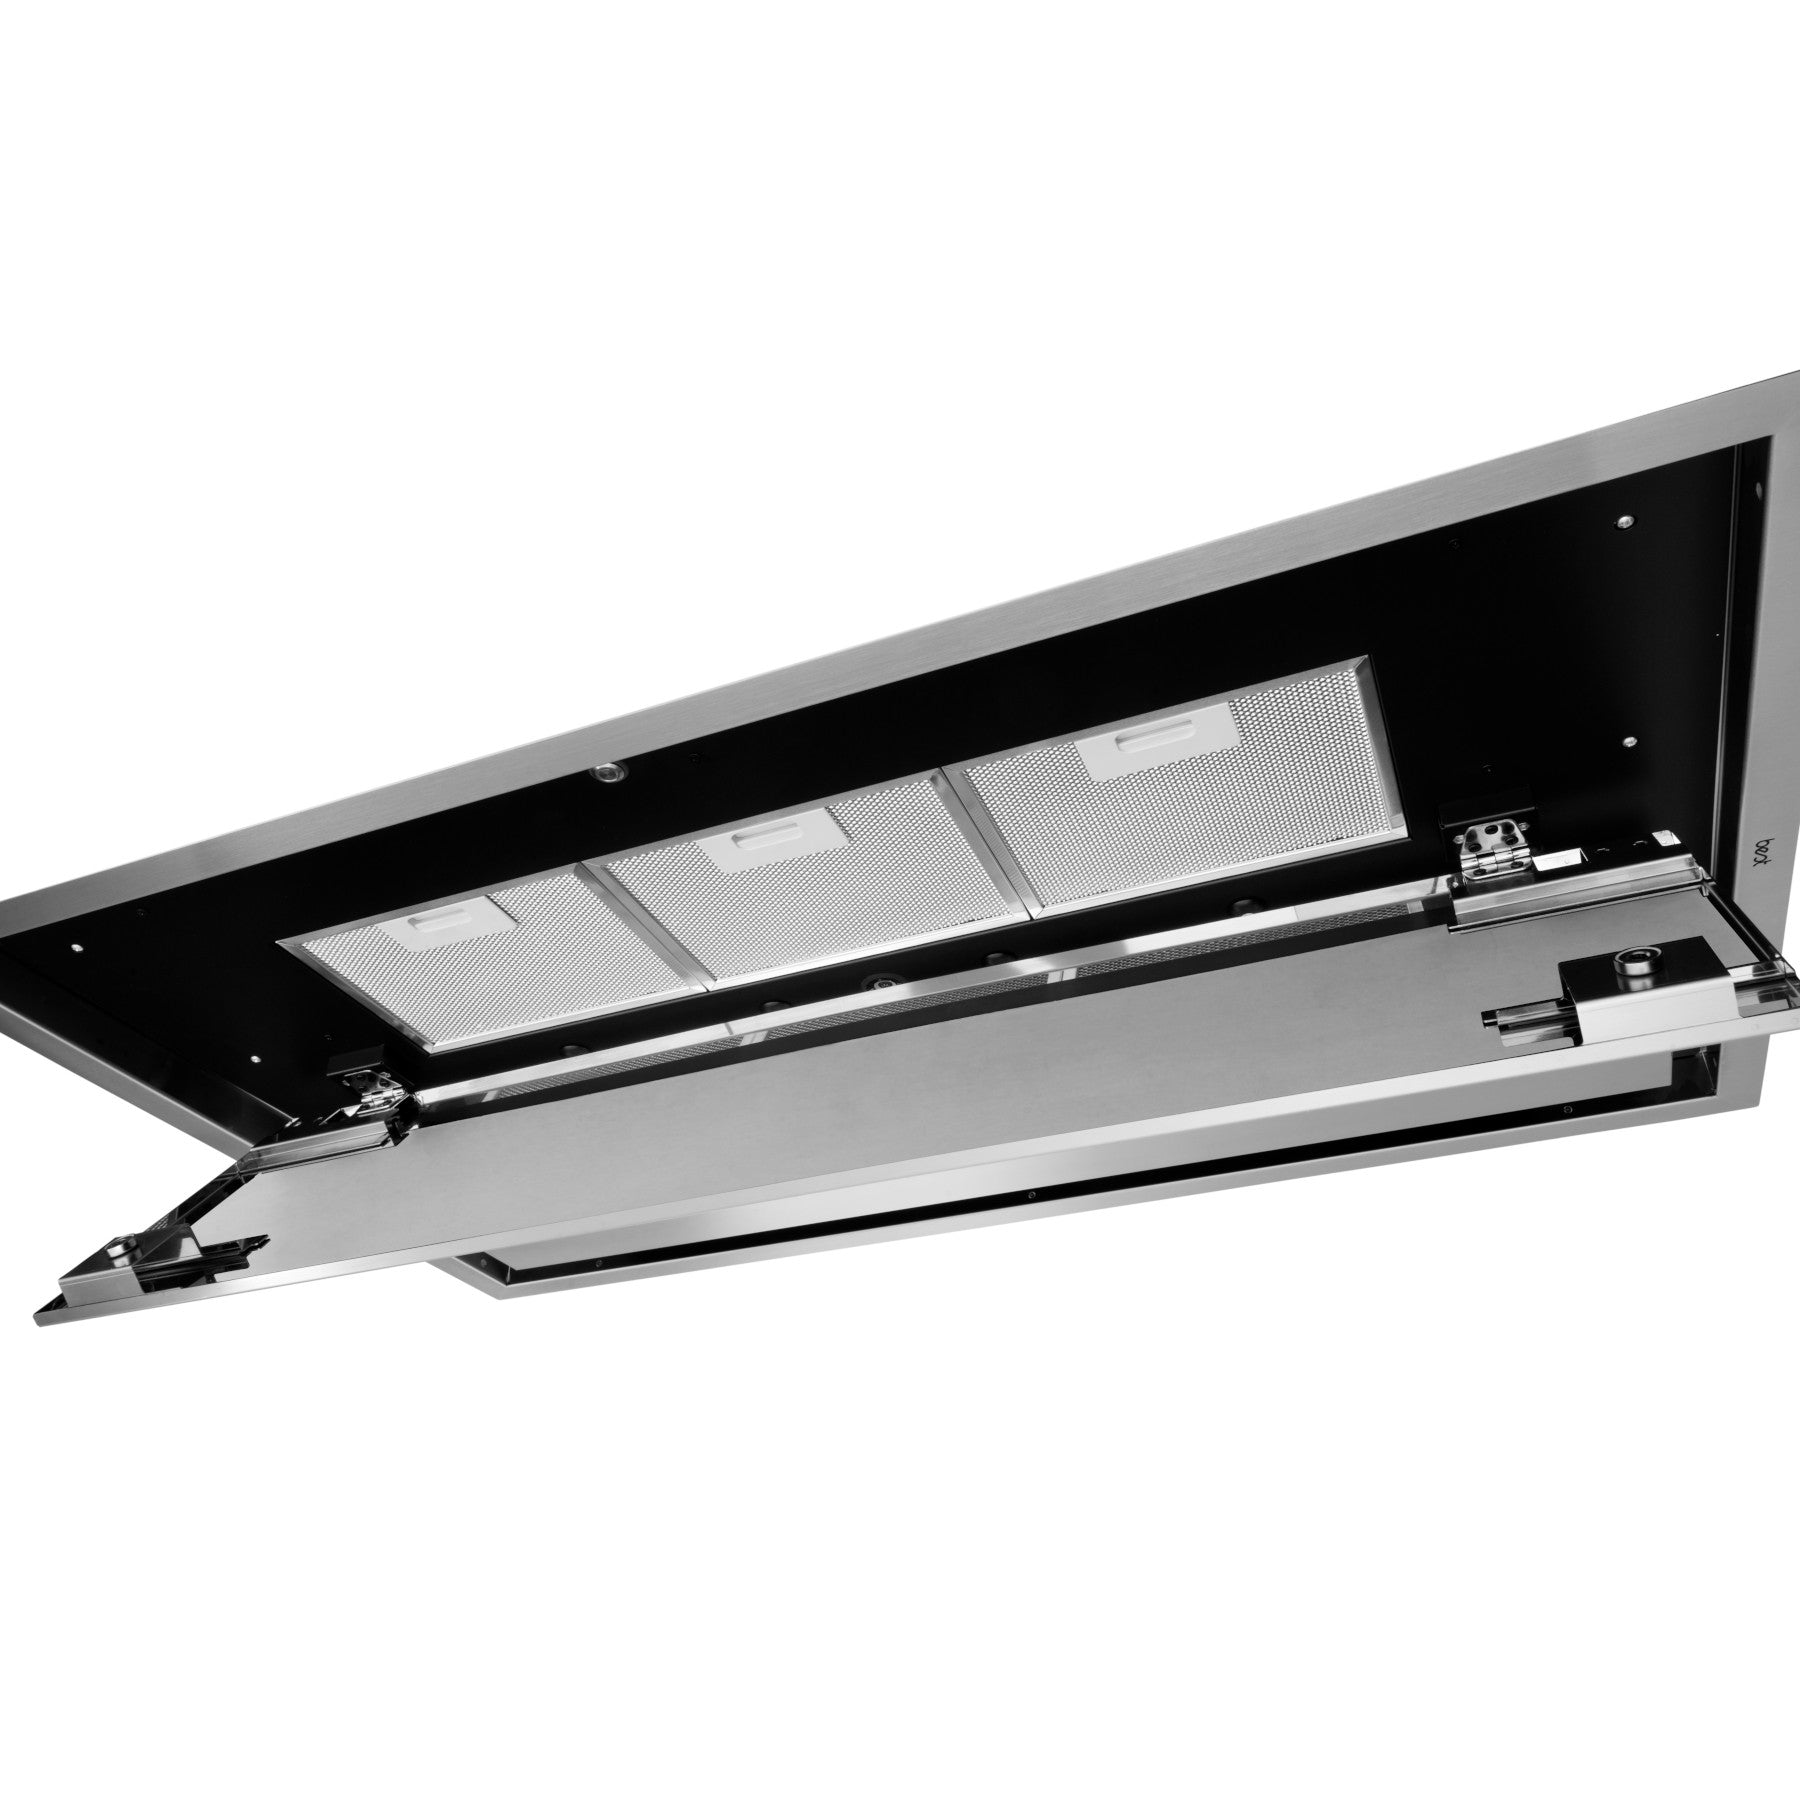 Best - 43.38 Inch 800 CFM Ceiling Mounted Range Hood Vent in Stainless - CC34IQSB